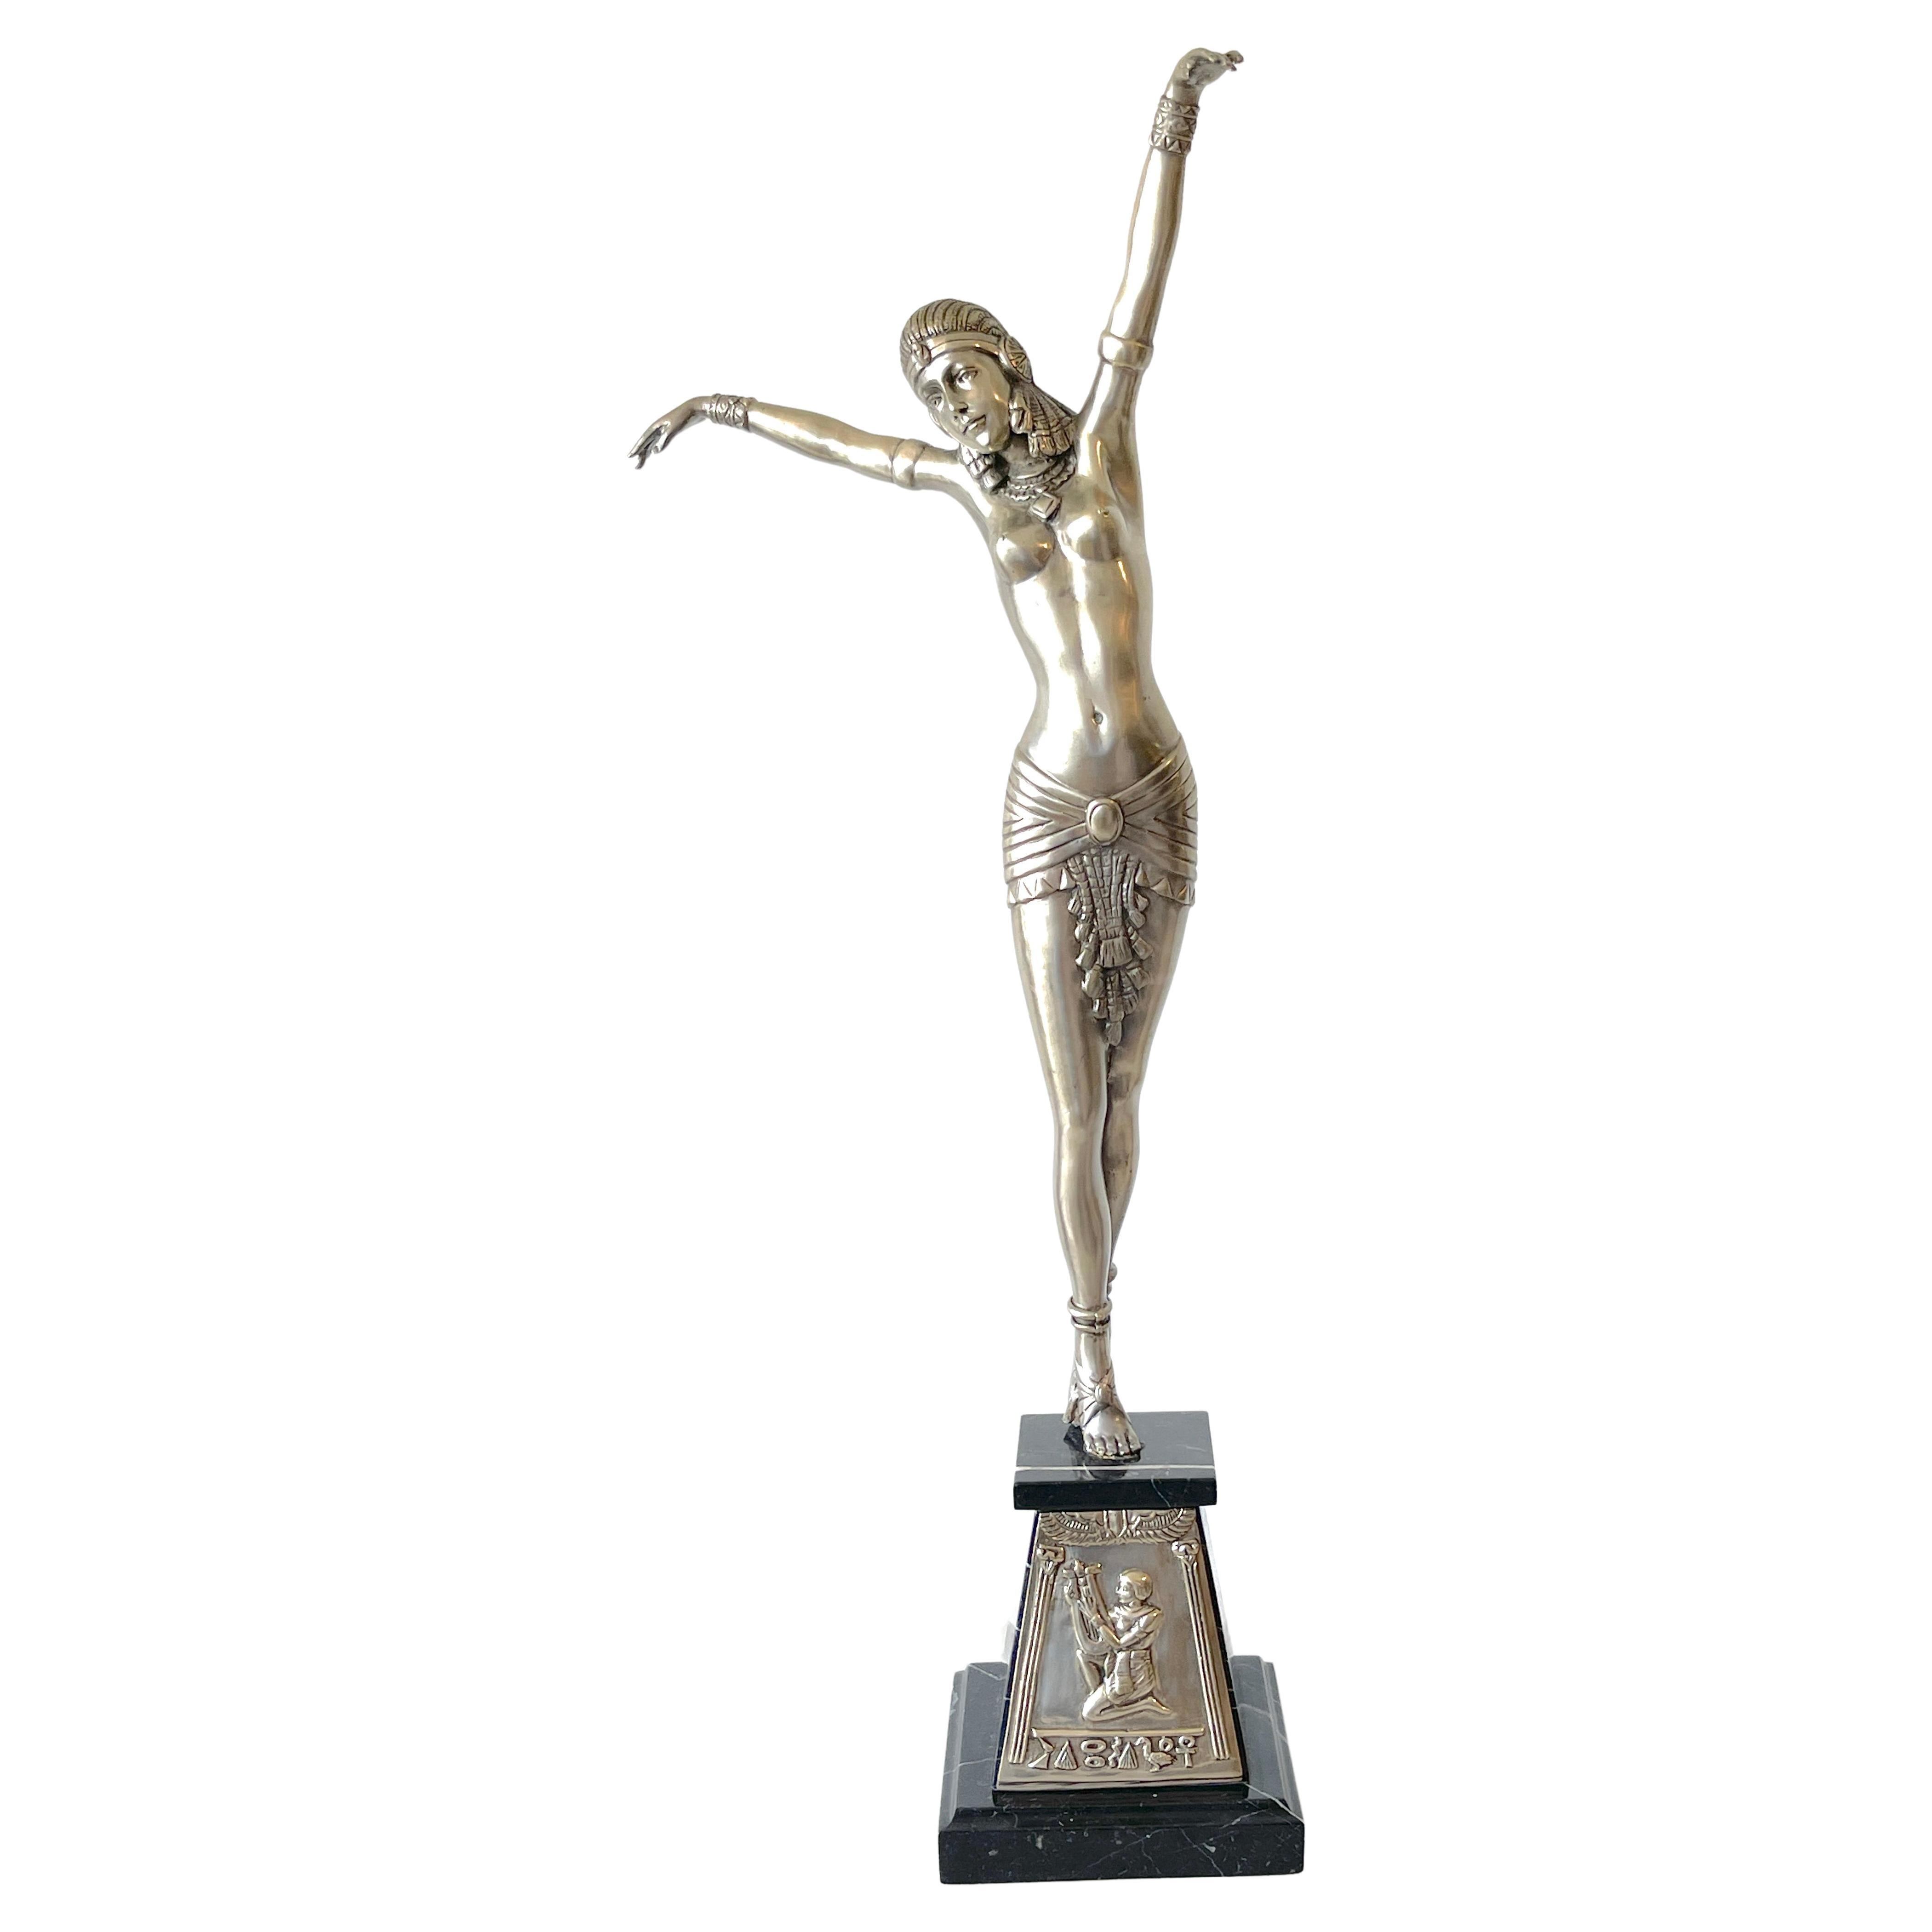 Art Deco Style Silverplated Bronze Egyptian Dancer after Demetre Chiparus